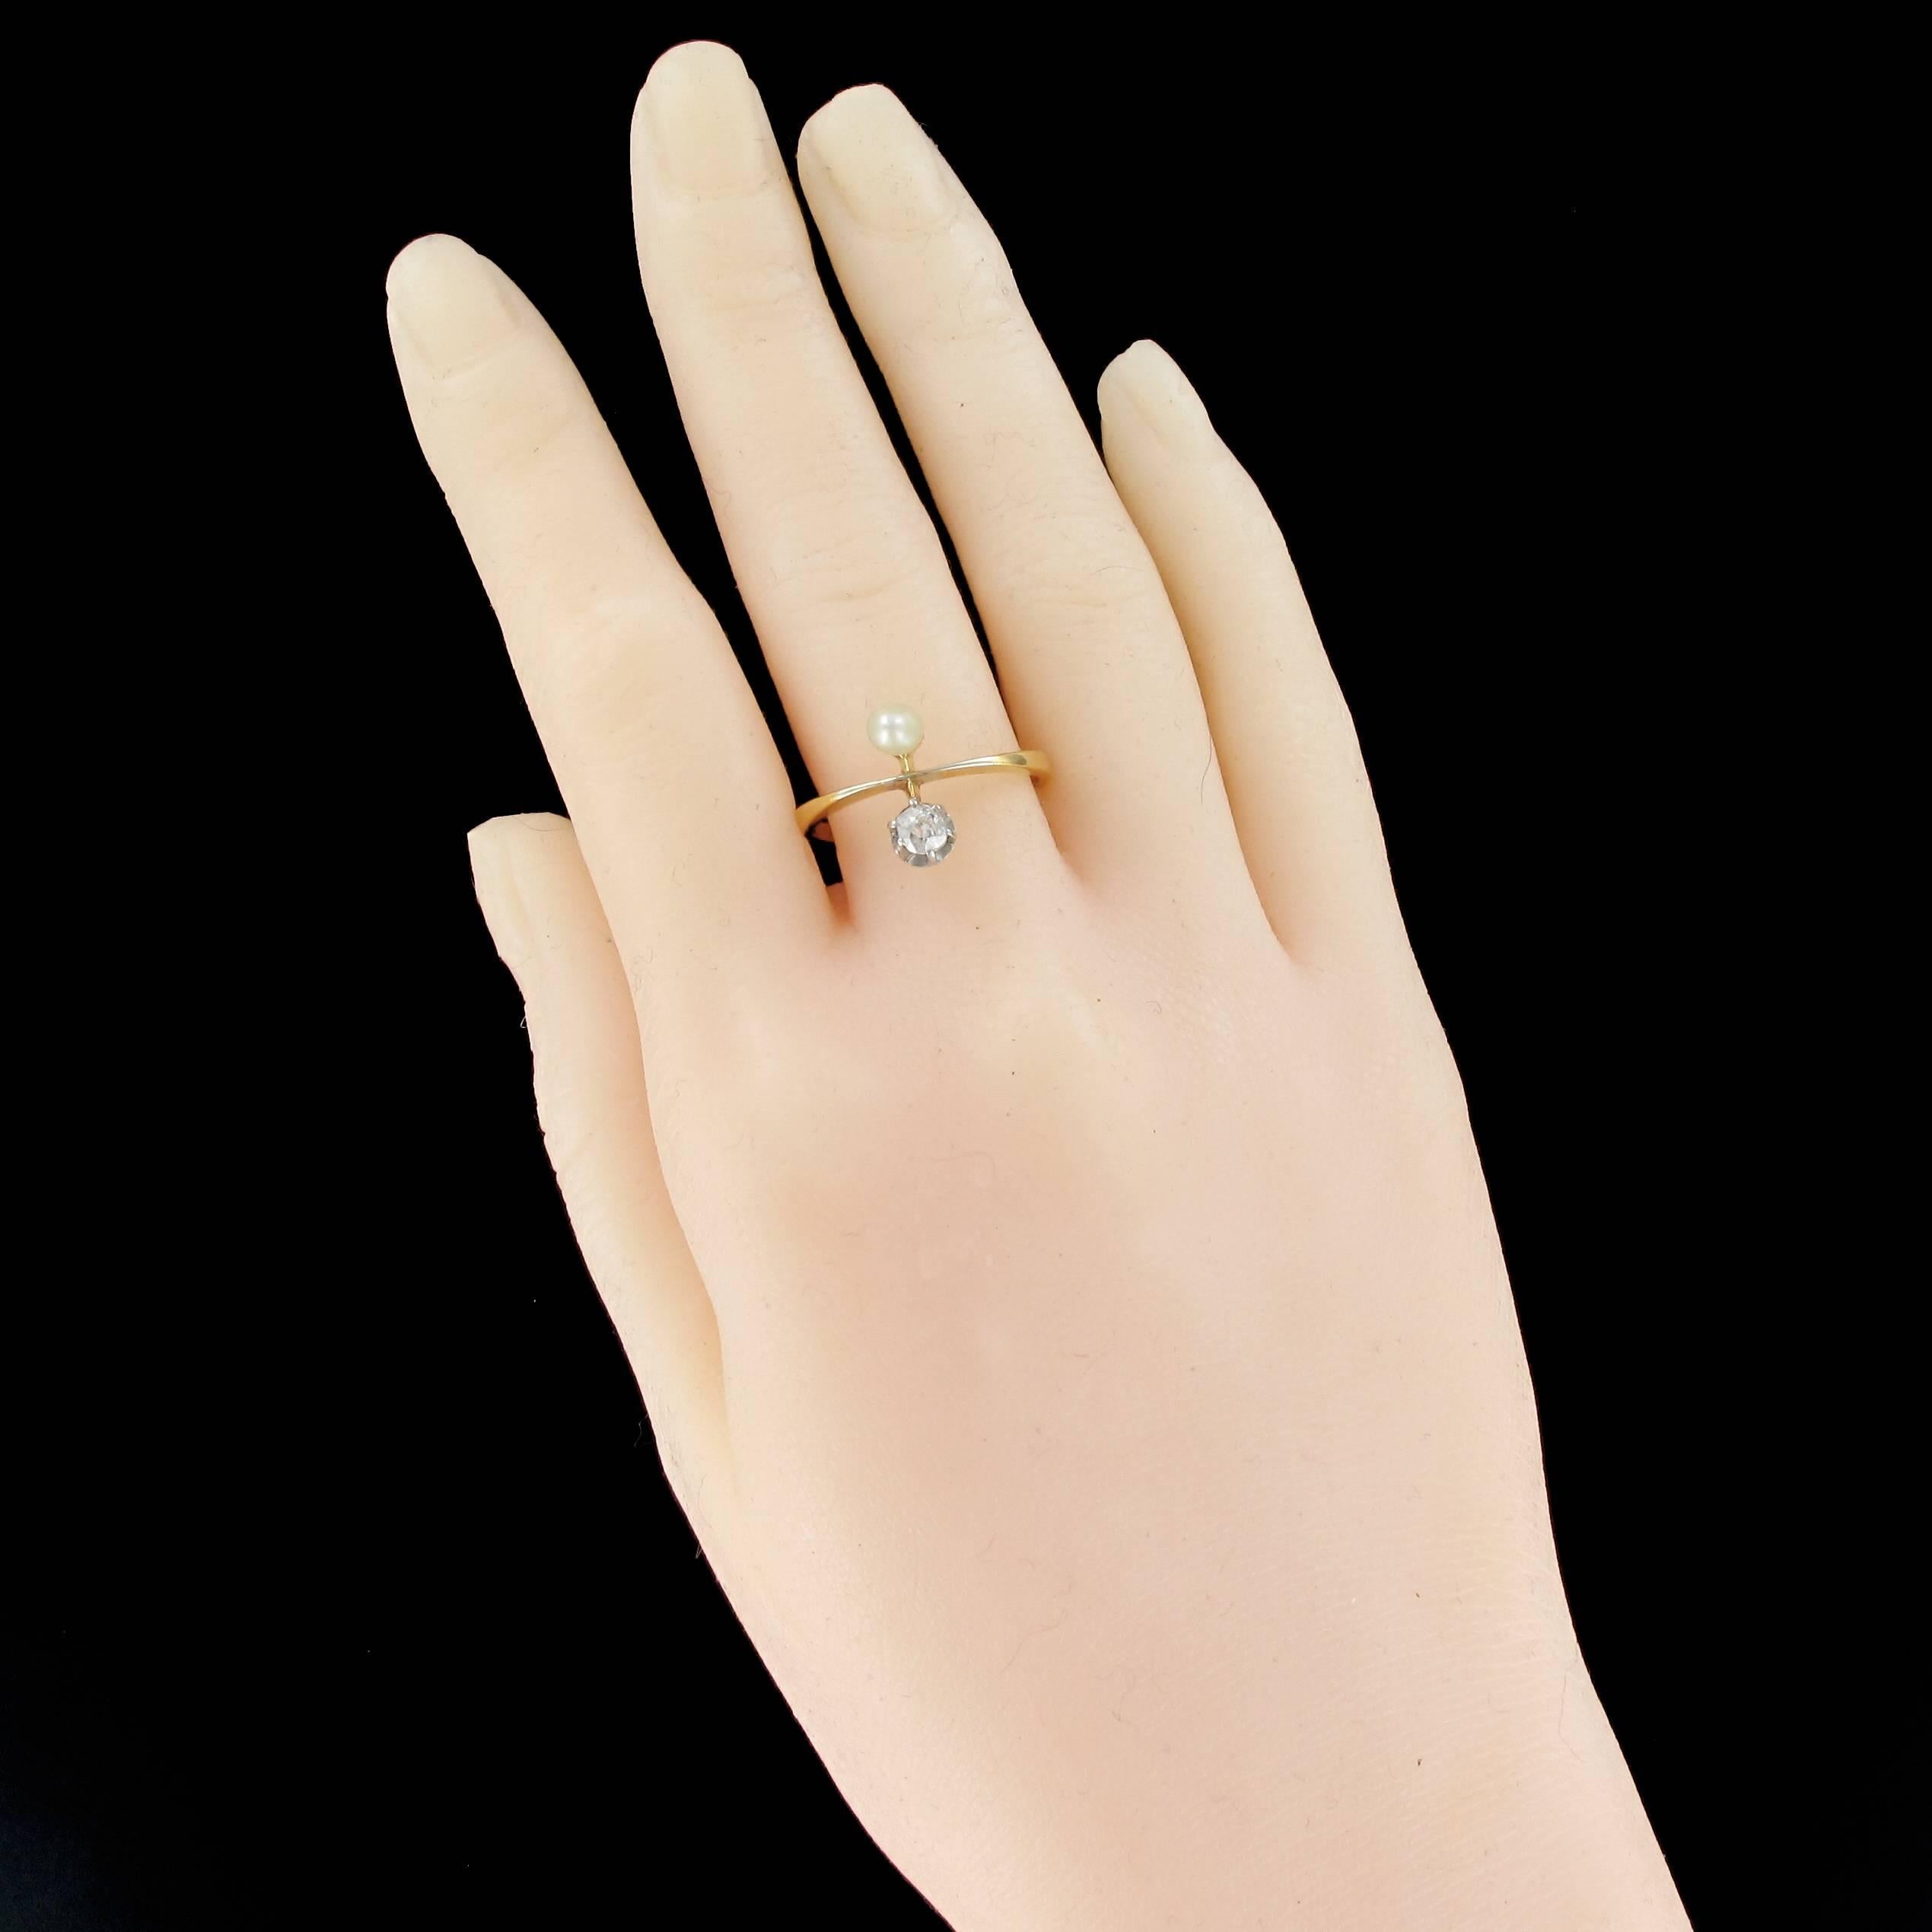 Ring in 18 carat yellow gold.
Ring you and me, it is set on its top with a natural pearl and an old brilliant cut diamond set with claws.
Total diamond weight: approximately 0.15 carat - pearl diameter: 4 / 4.5 mm.
Height : 13 mm, width: 5 mm, width